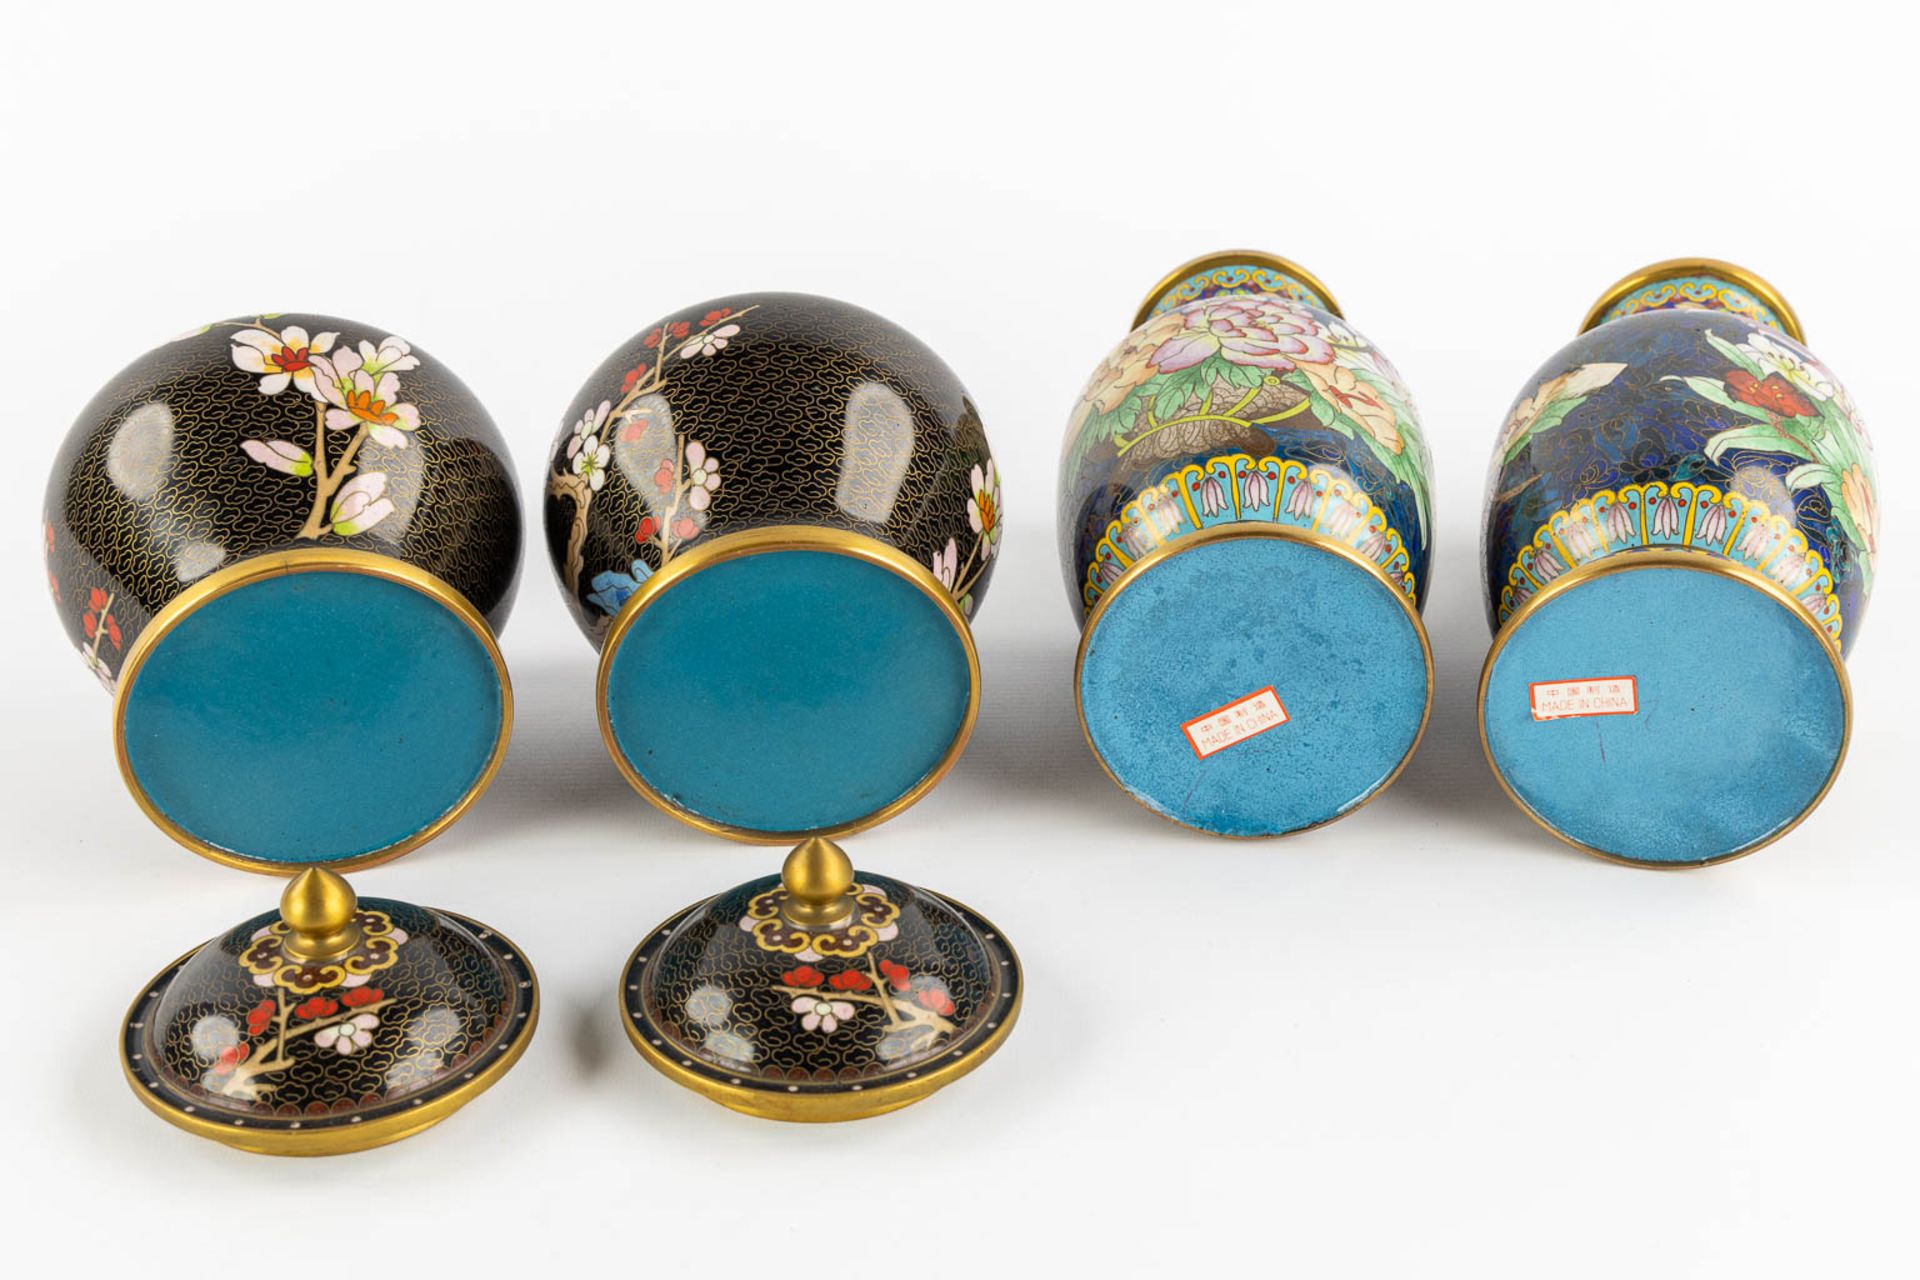 Twelve pieces of Cloisonné enamelled vases and trinklet bowls. Three pairs. (H:23 cm) - Image 14 of 14